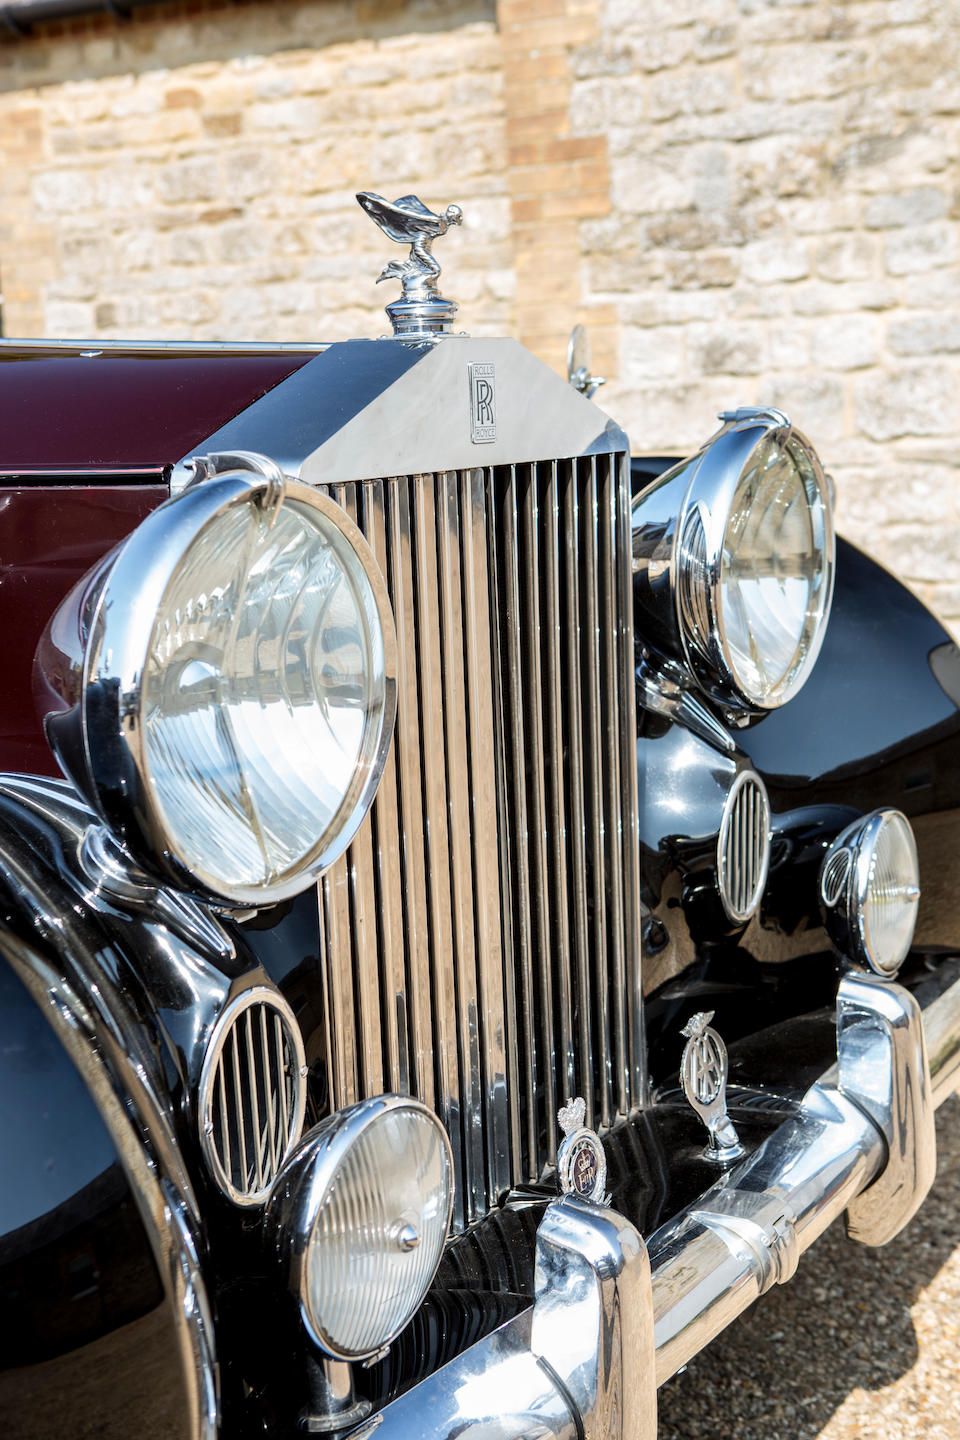 Completed in Rolls-Royce's Golden Jubilee year, used by HM The Queen, kept in the Royal Mews from 1959 until 2002, 1955 Rolls-Royce Phantom IV State Landaulette  Chassis no. 4BP5